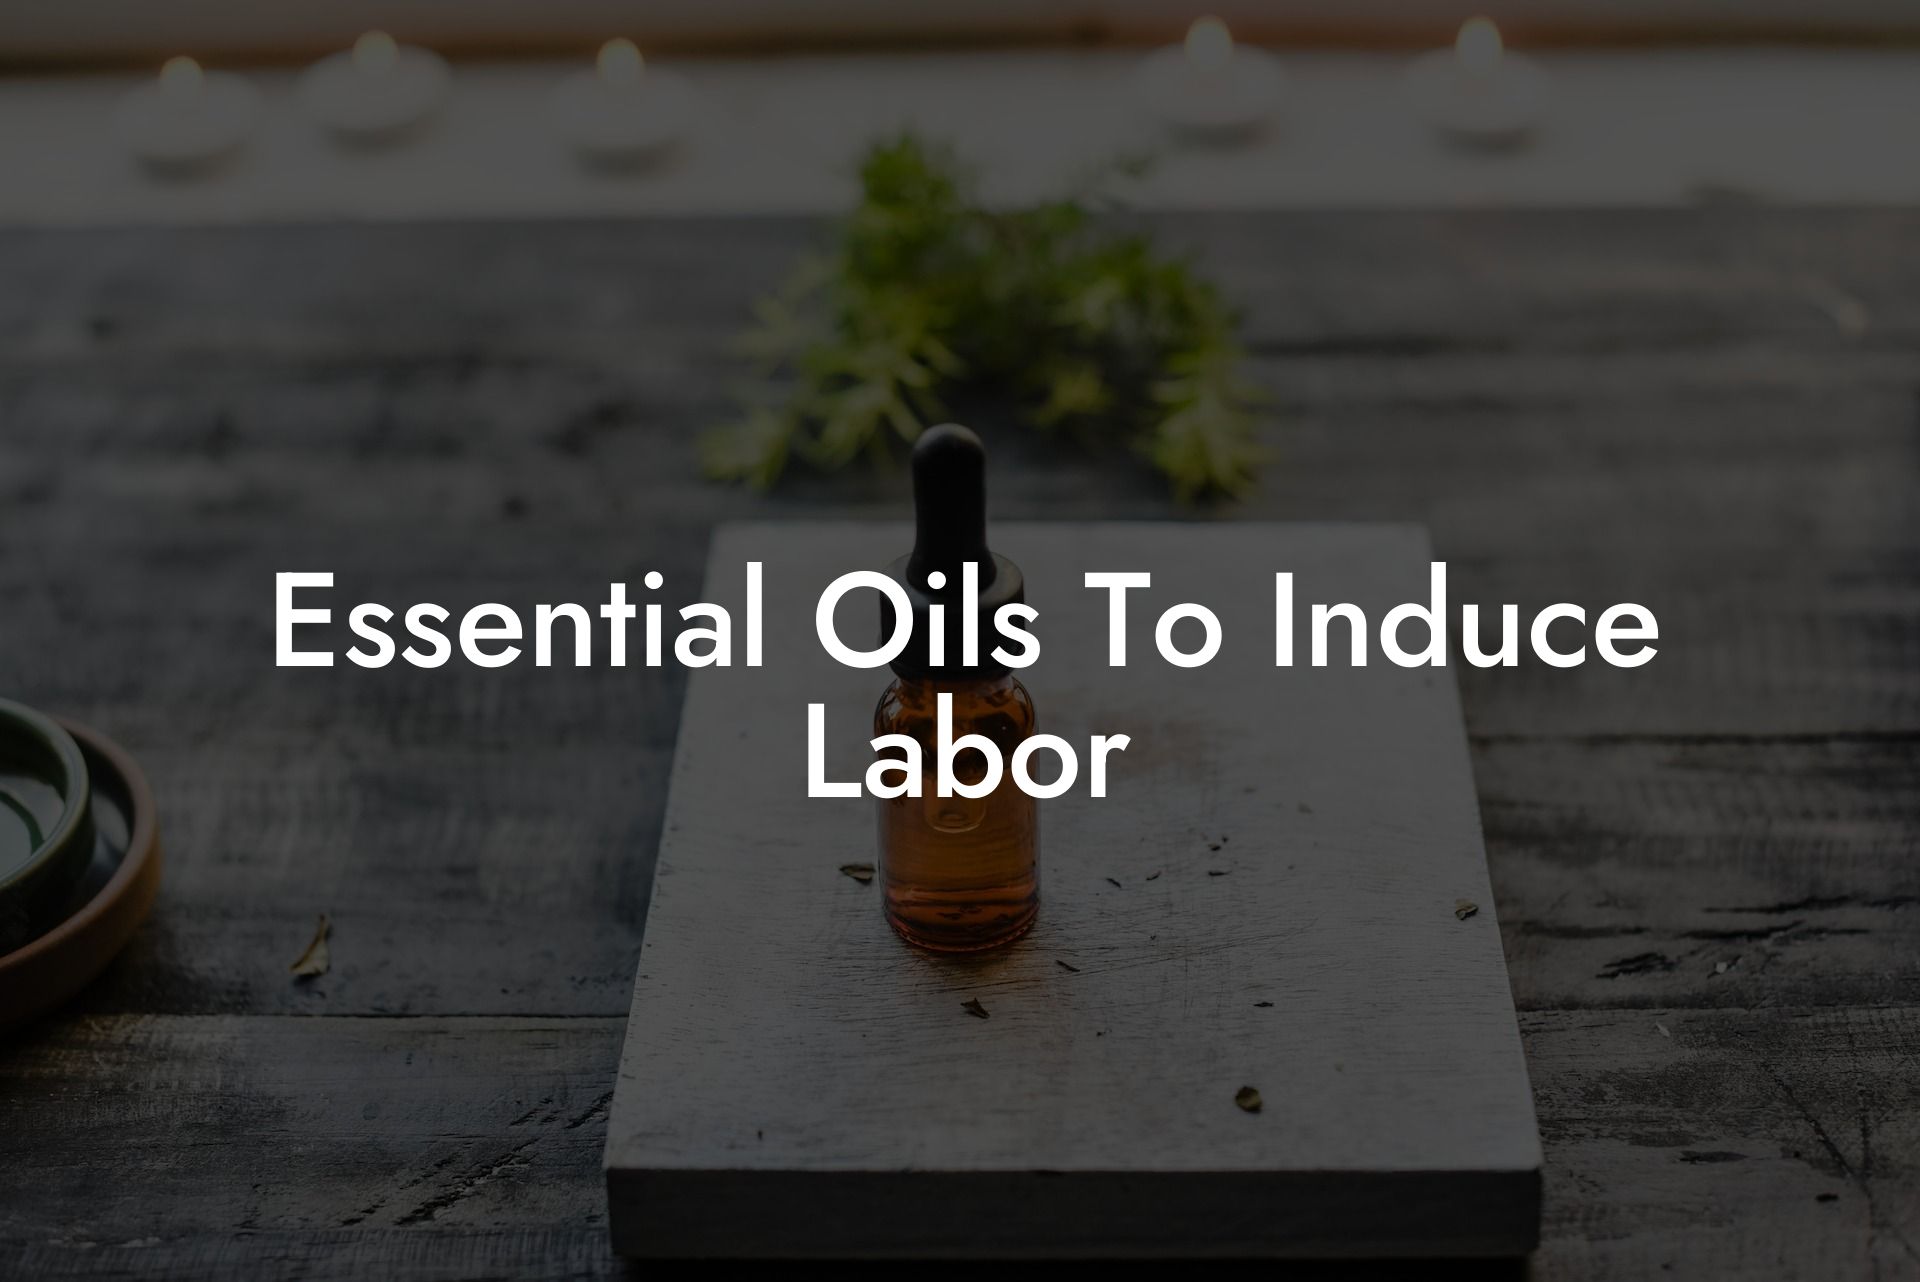 Essential Oils To Induce Labor